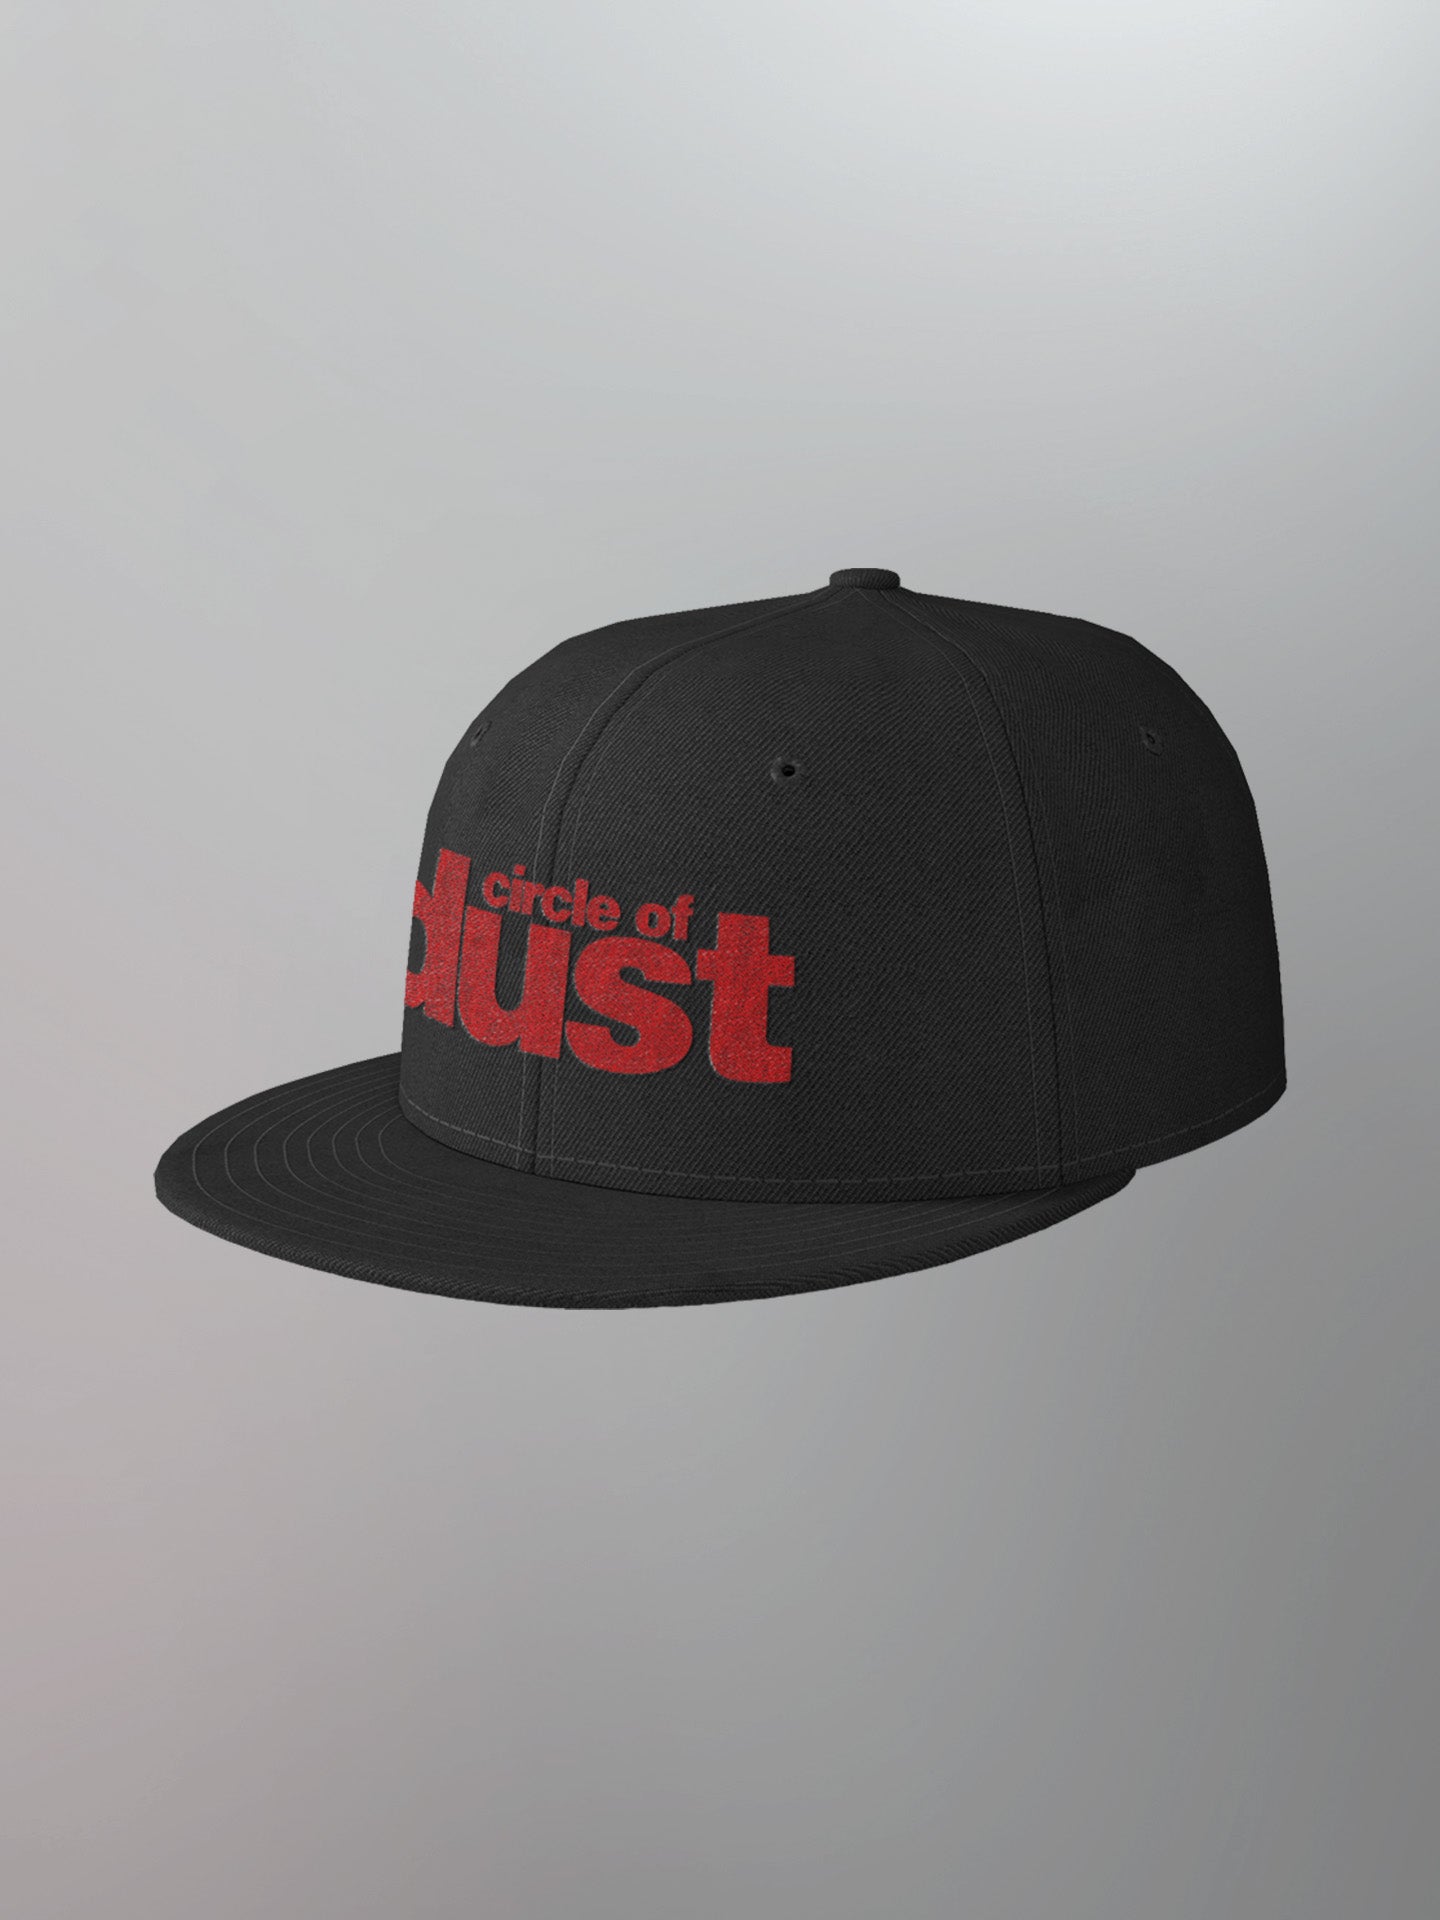 Circle of Dust - Logo Snapback Hat [Red]